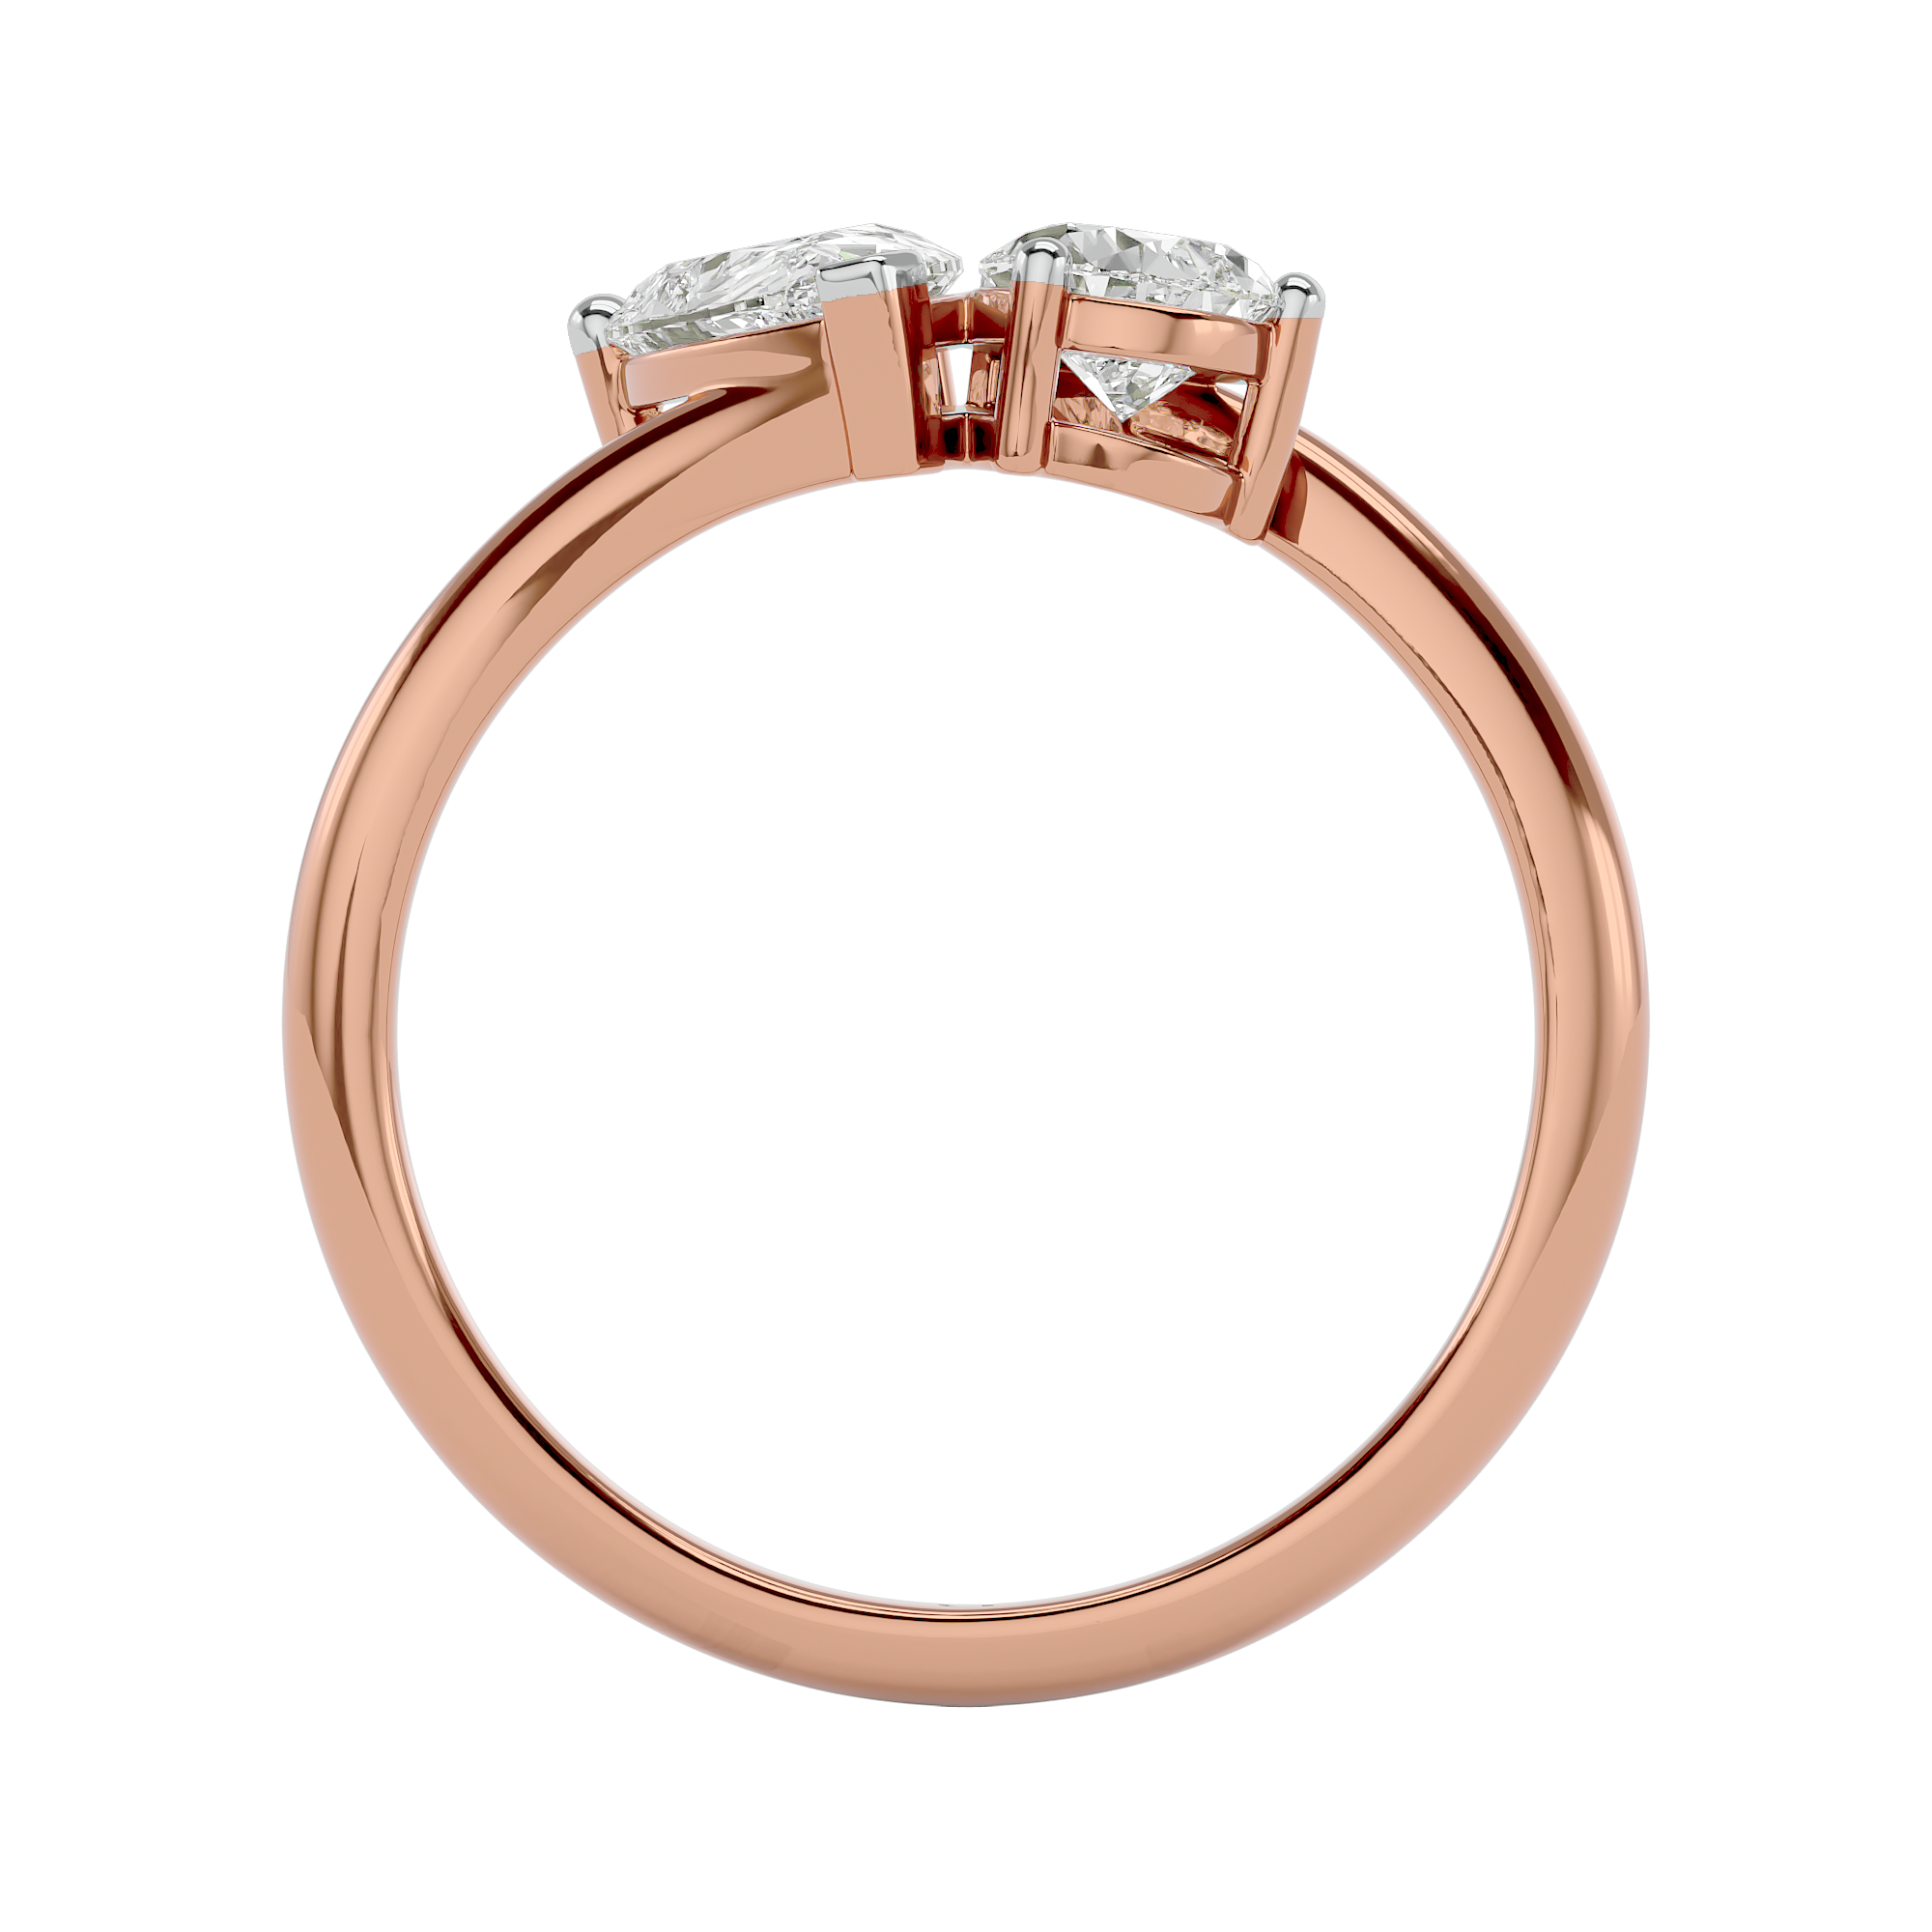 Lab Grown Solitaire Diamond Ring - 14 KT Rose Gold Metal 